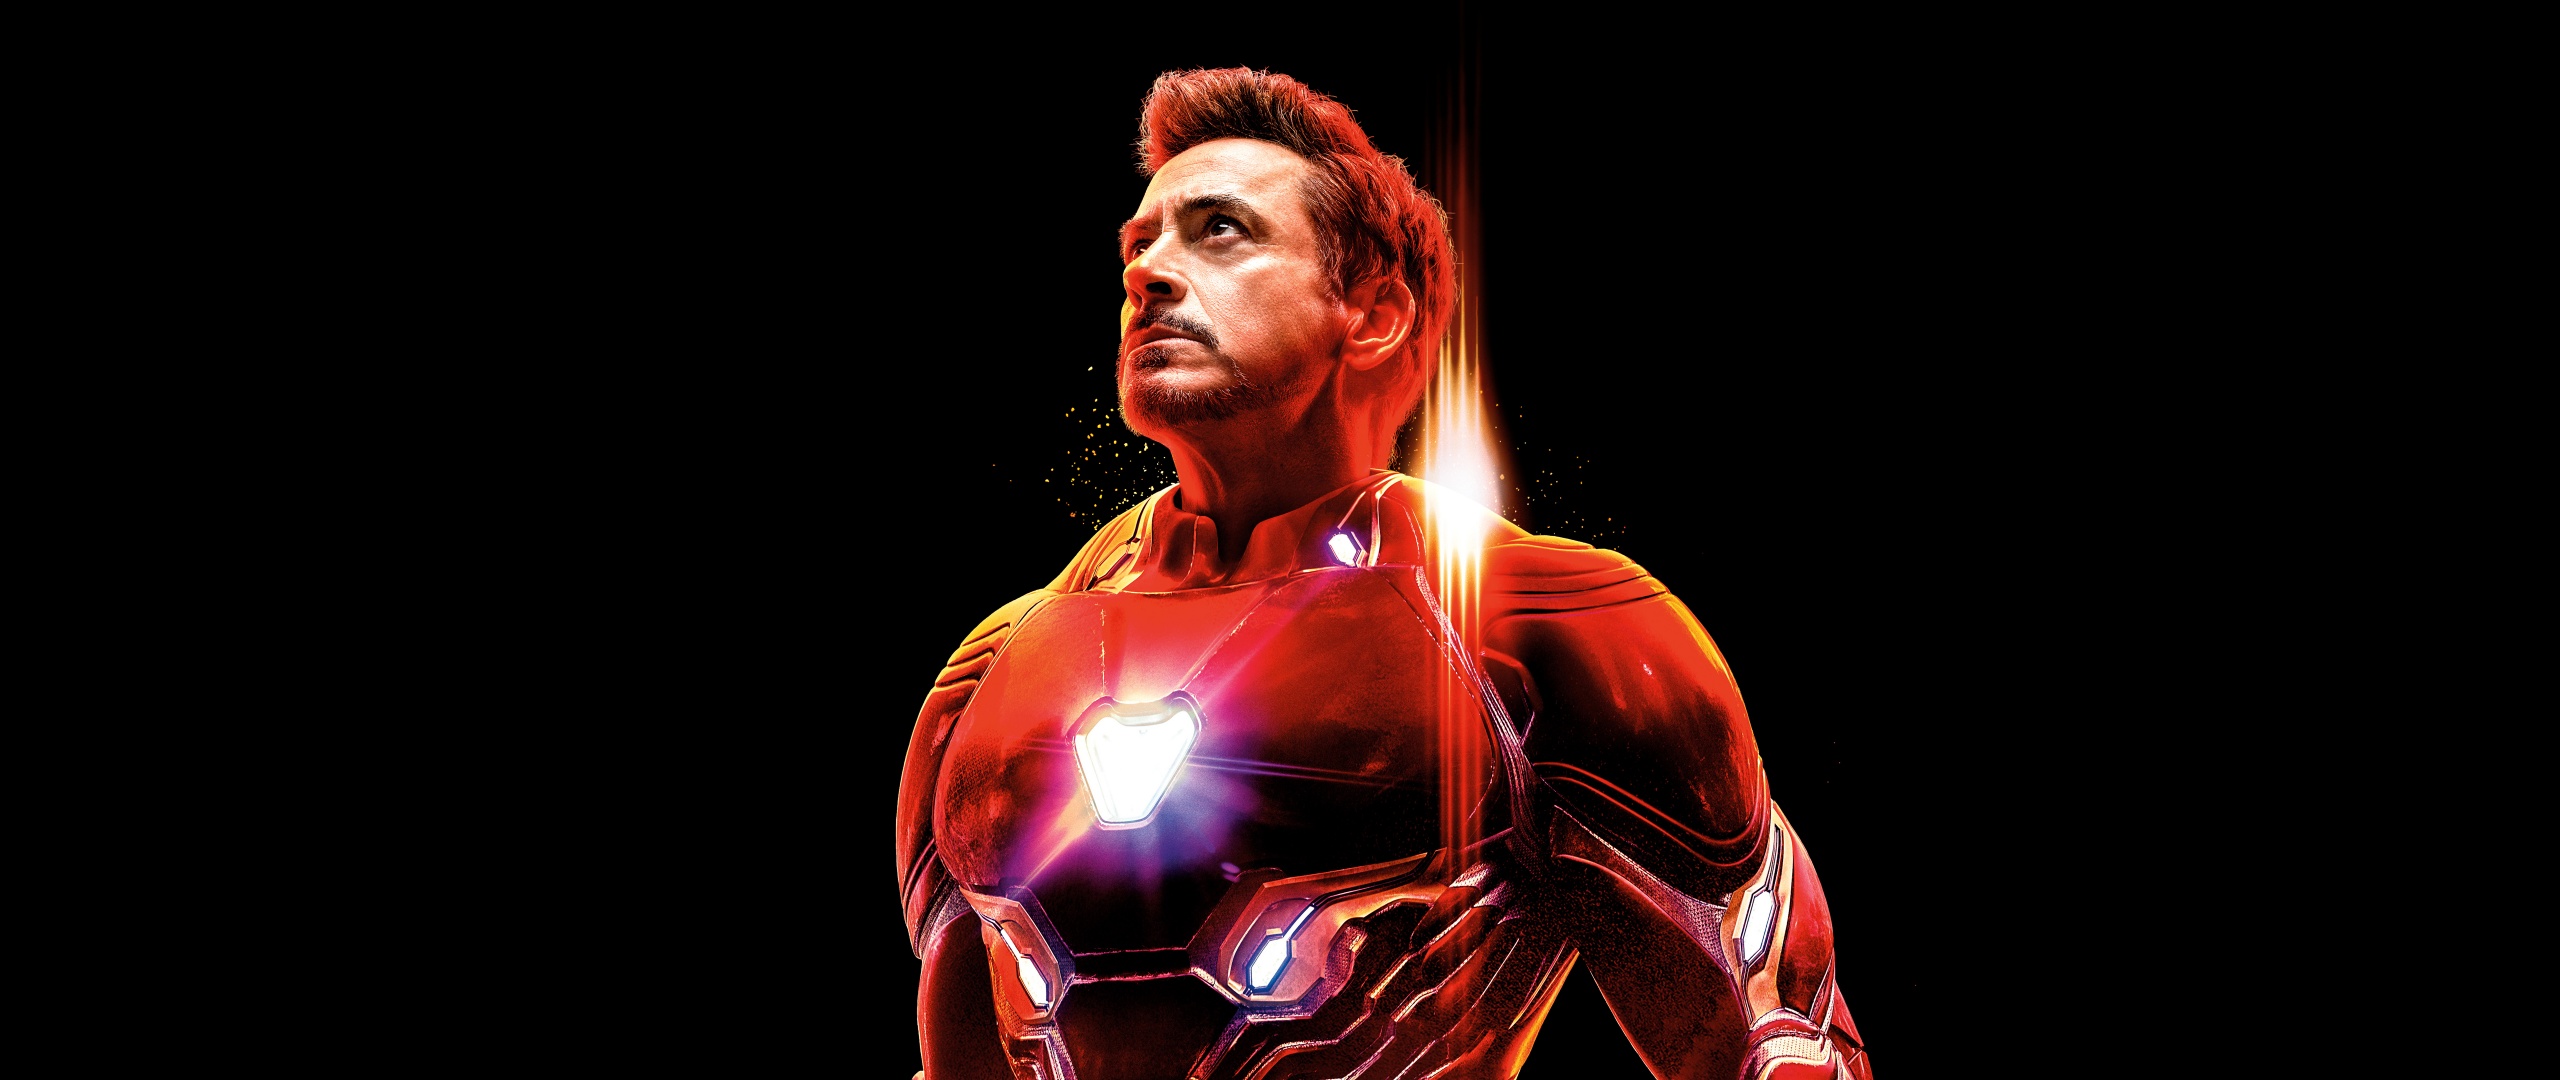 1280x1024 I Am Iron Man 4k 1280x1024 Resolution HD 4k Wallpapers Images  Backgrounds Photos and Pictures